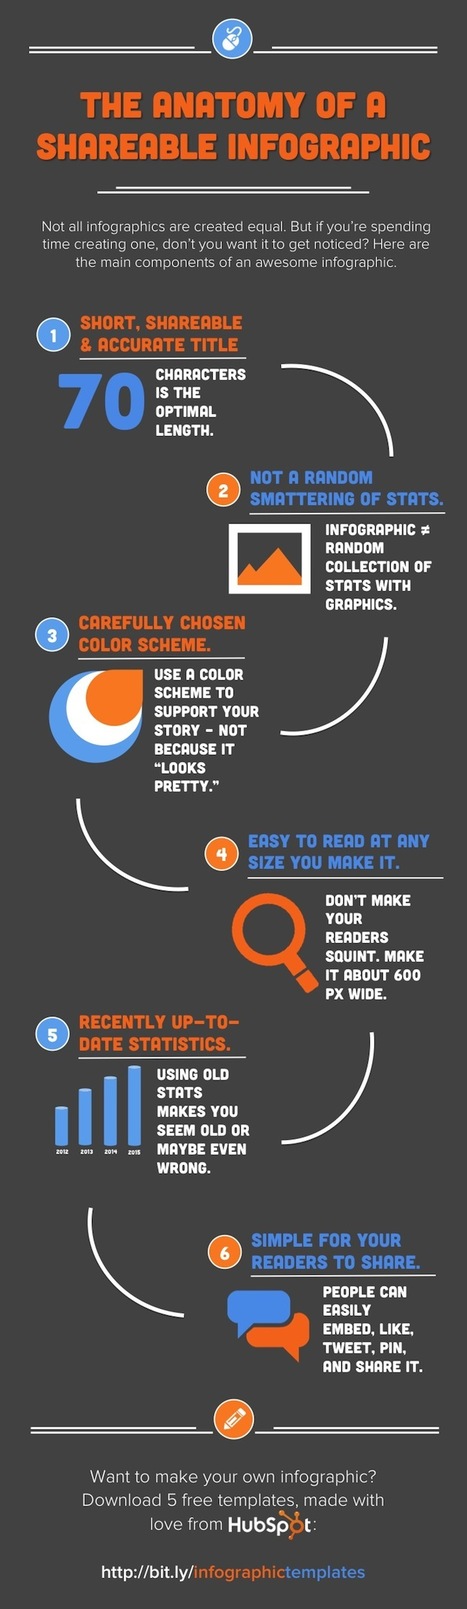 The Anatomy of a Highly Shareable Infographic | digital marketing strategy | Scoop.it